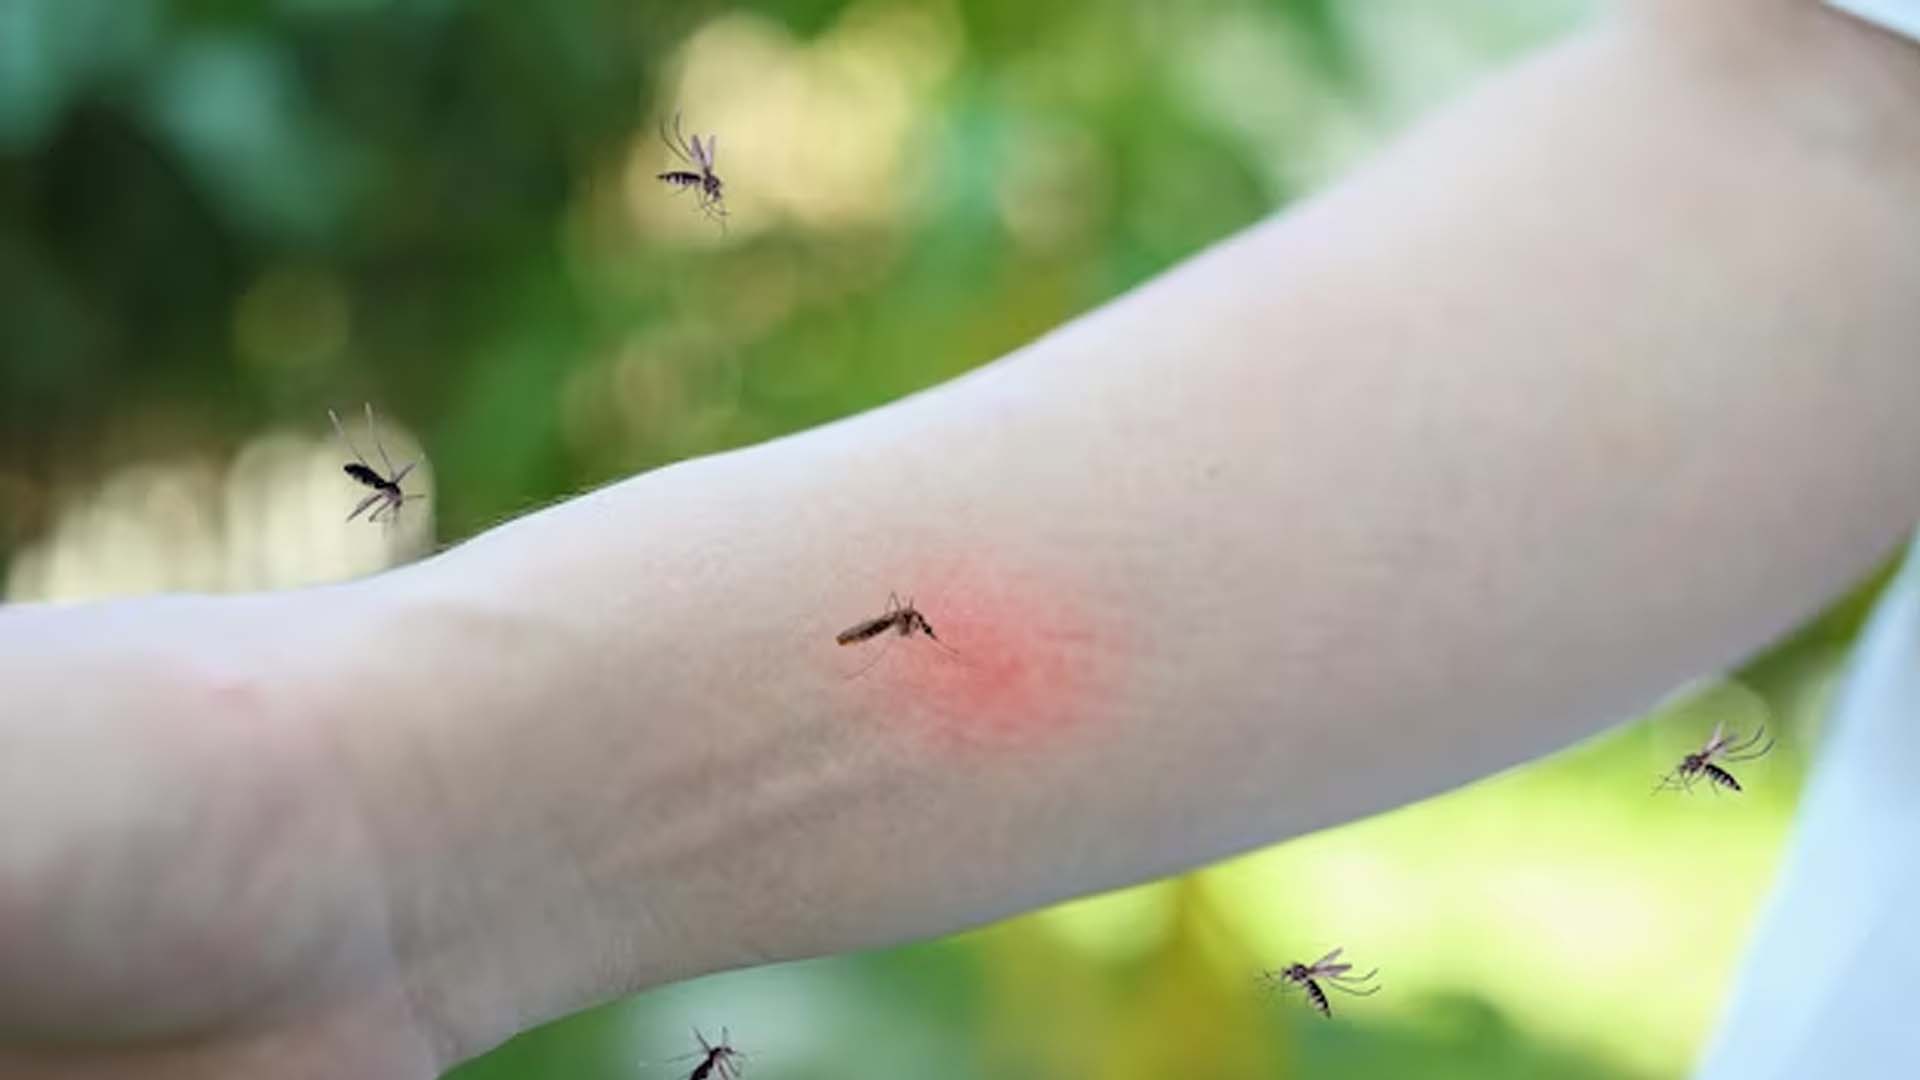 Mosquitoes Biting on Hand